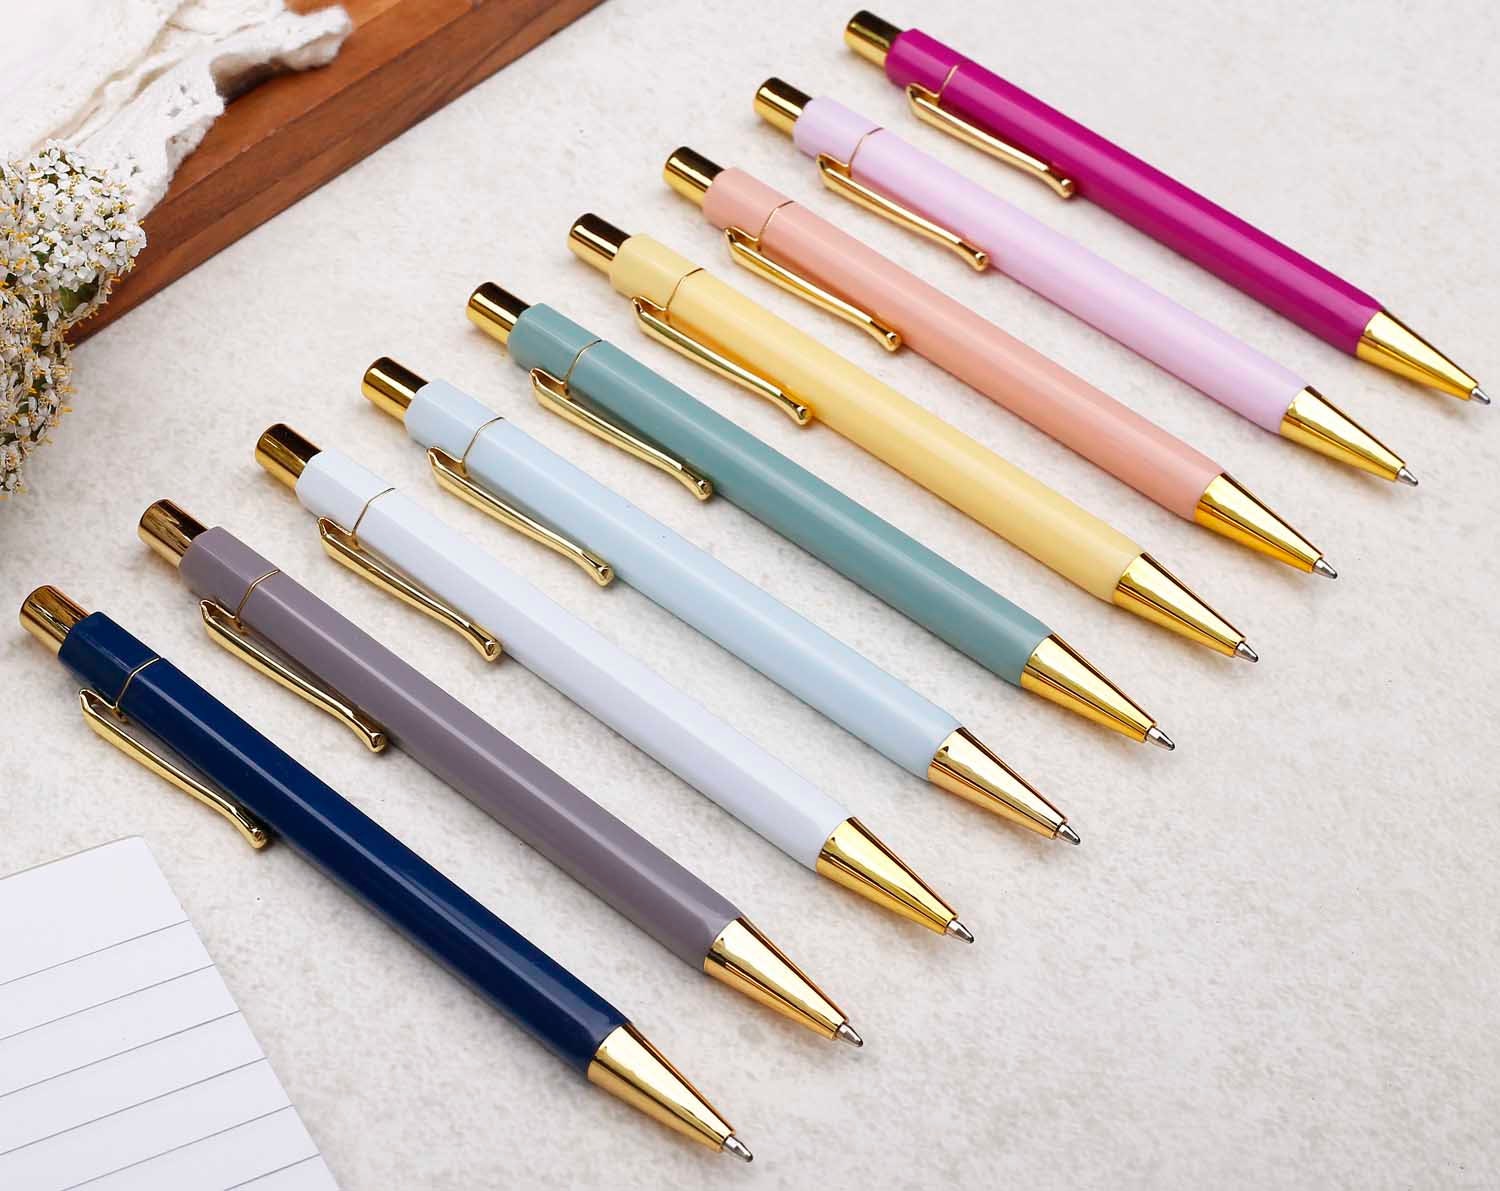 Authentigo Fancy Ballpoint Pen Set For Women, 2 Ballpoint Pens for  Journaling and Writing, Inspirational Pen Gift Box, Gold Pen and Pink Pen  with Gold